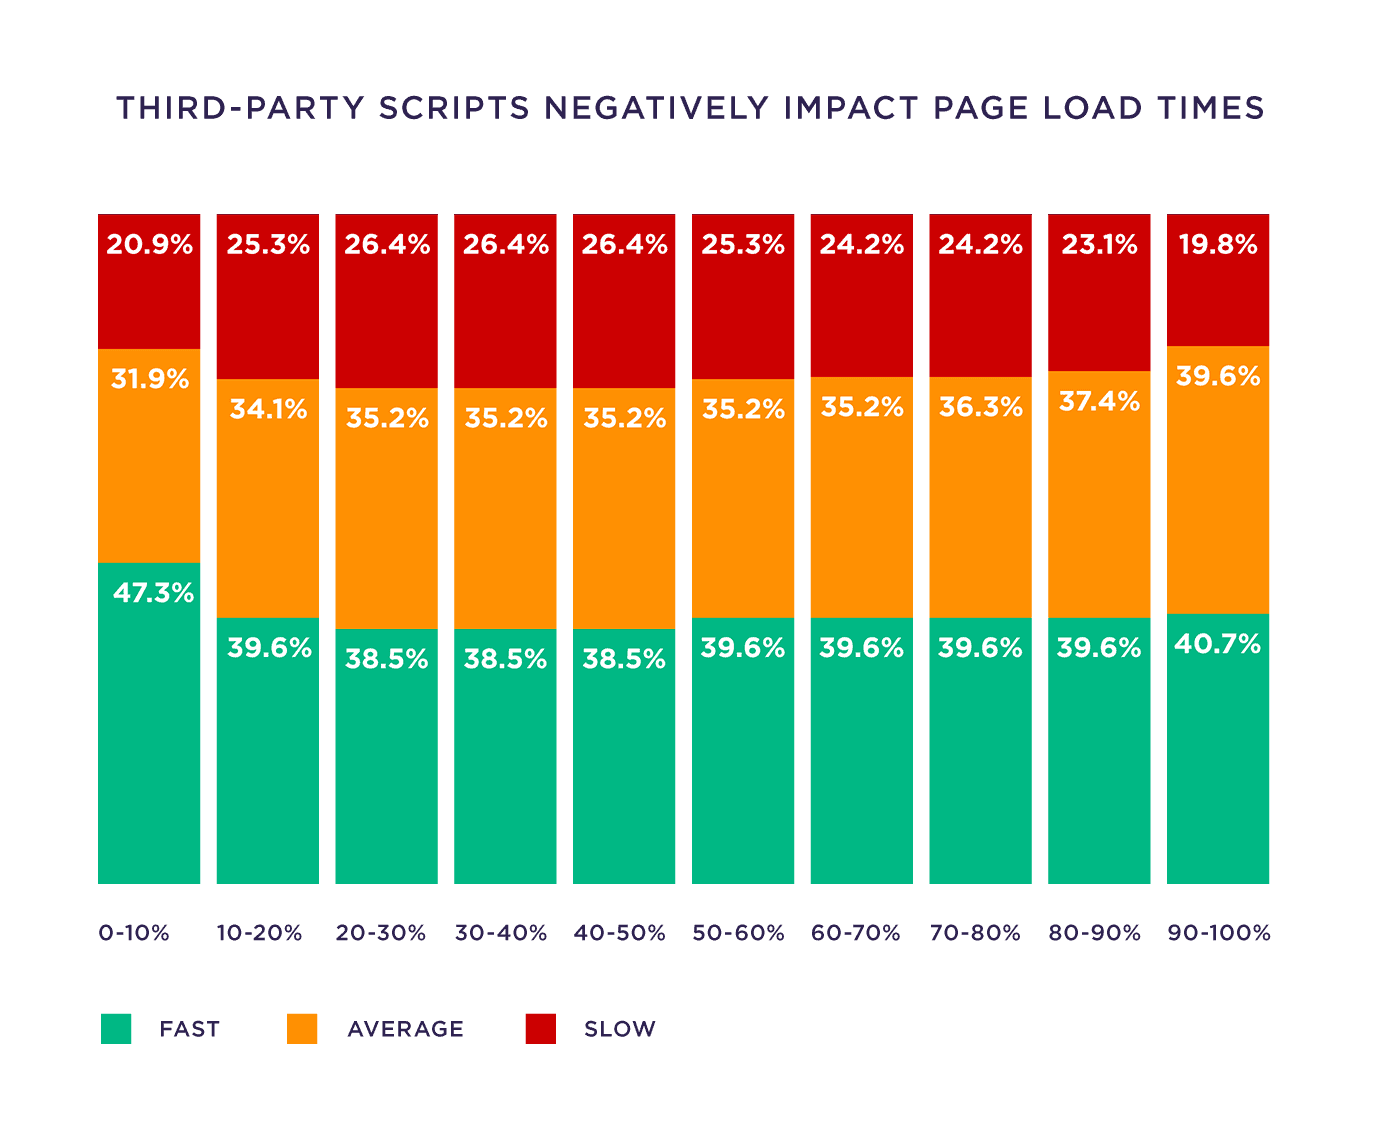 Third-party scripts negatively impact page load times